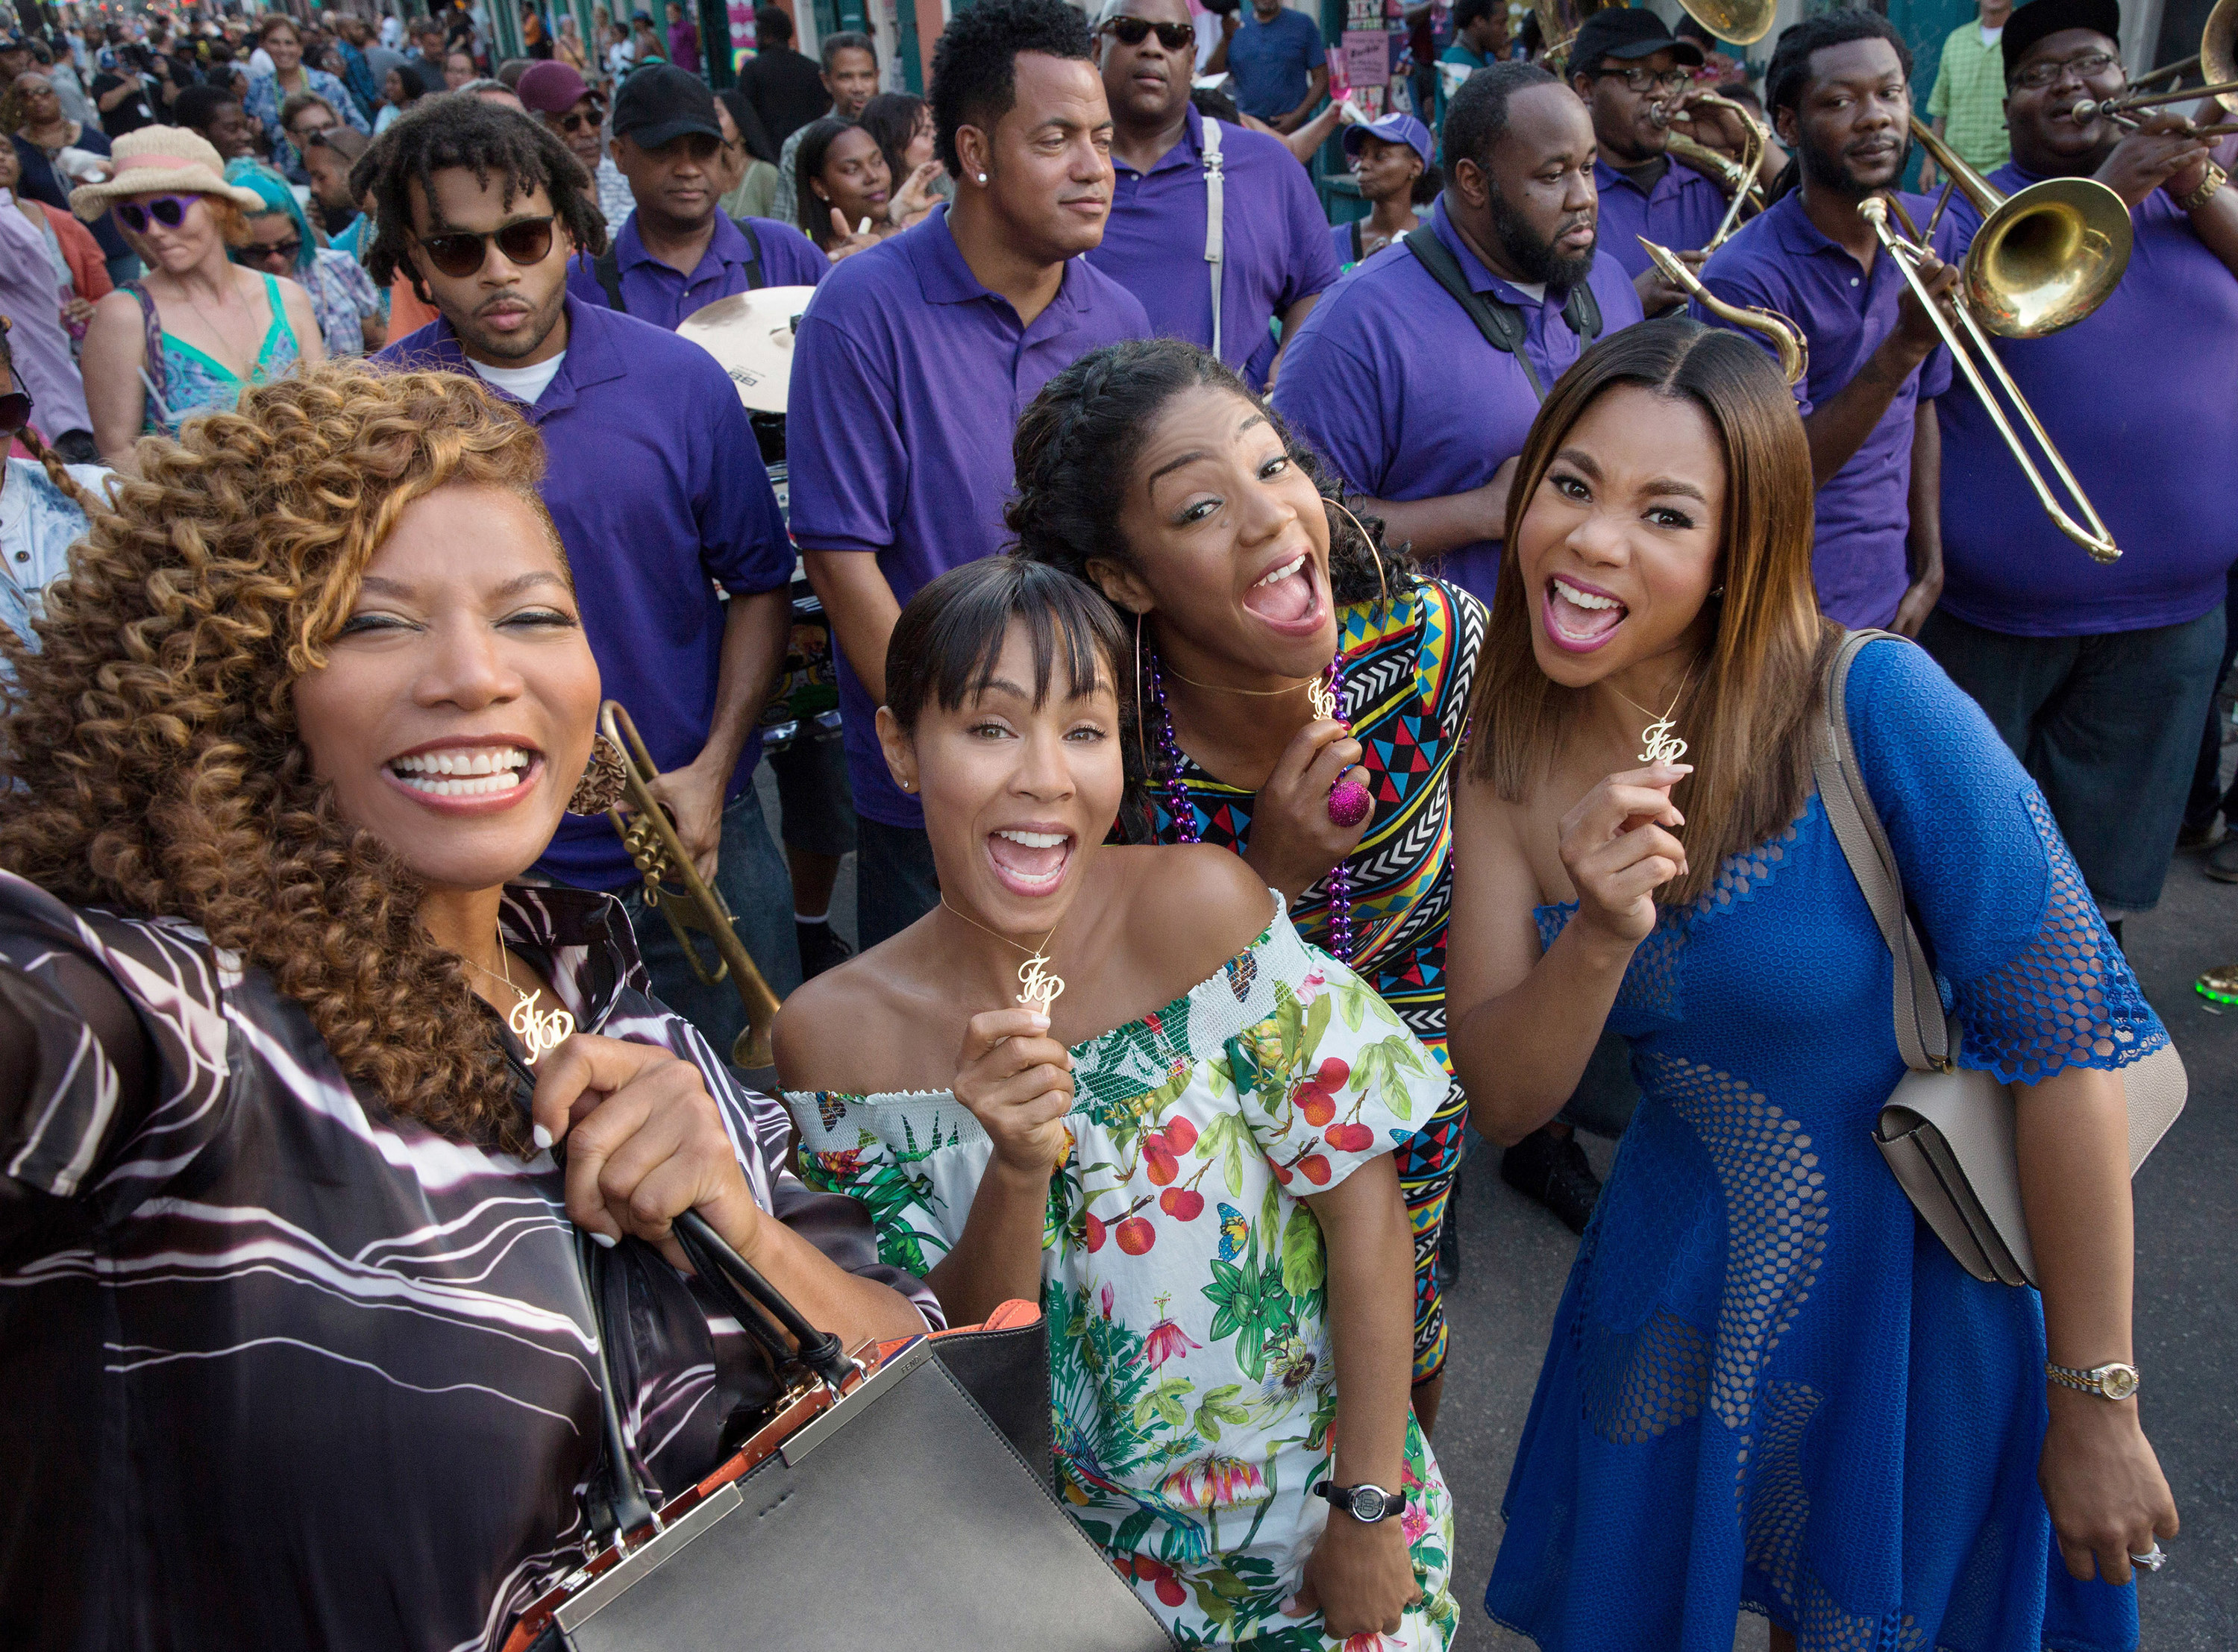 Queen Latifah, Jada Pinkett Smith, Tiffany Haddish, and Regina Hall pose with their Flossy Posse necklaces